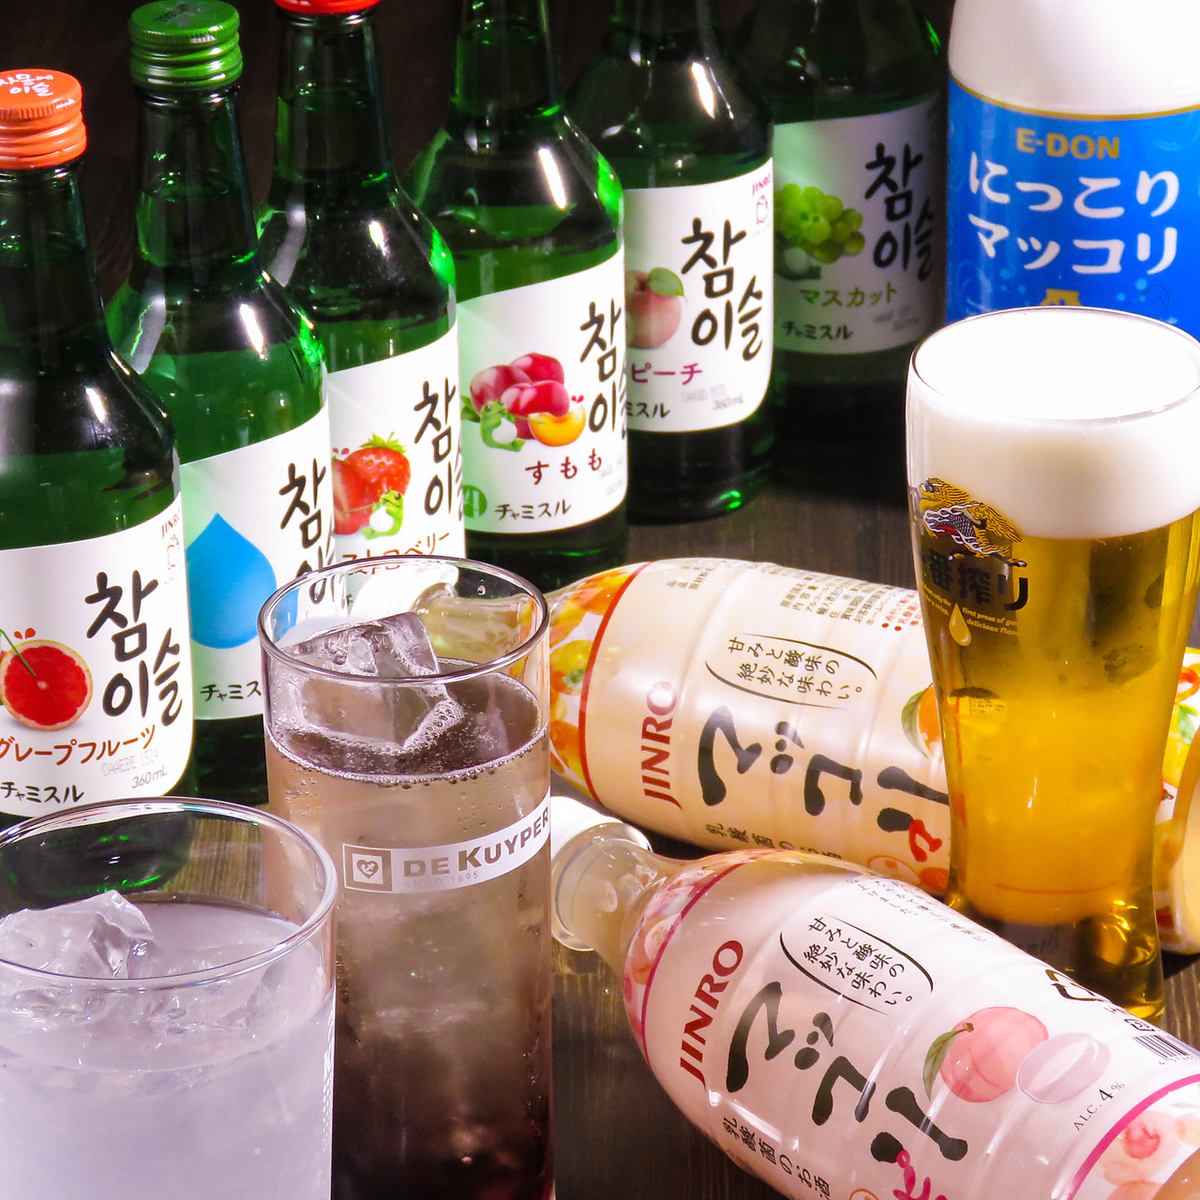 2-hour all-you-can-drink 1,800 yen★Korean soju and makgeolli, of course! Lots of variety◎